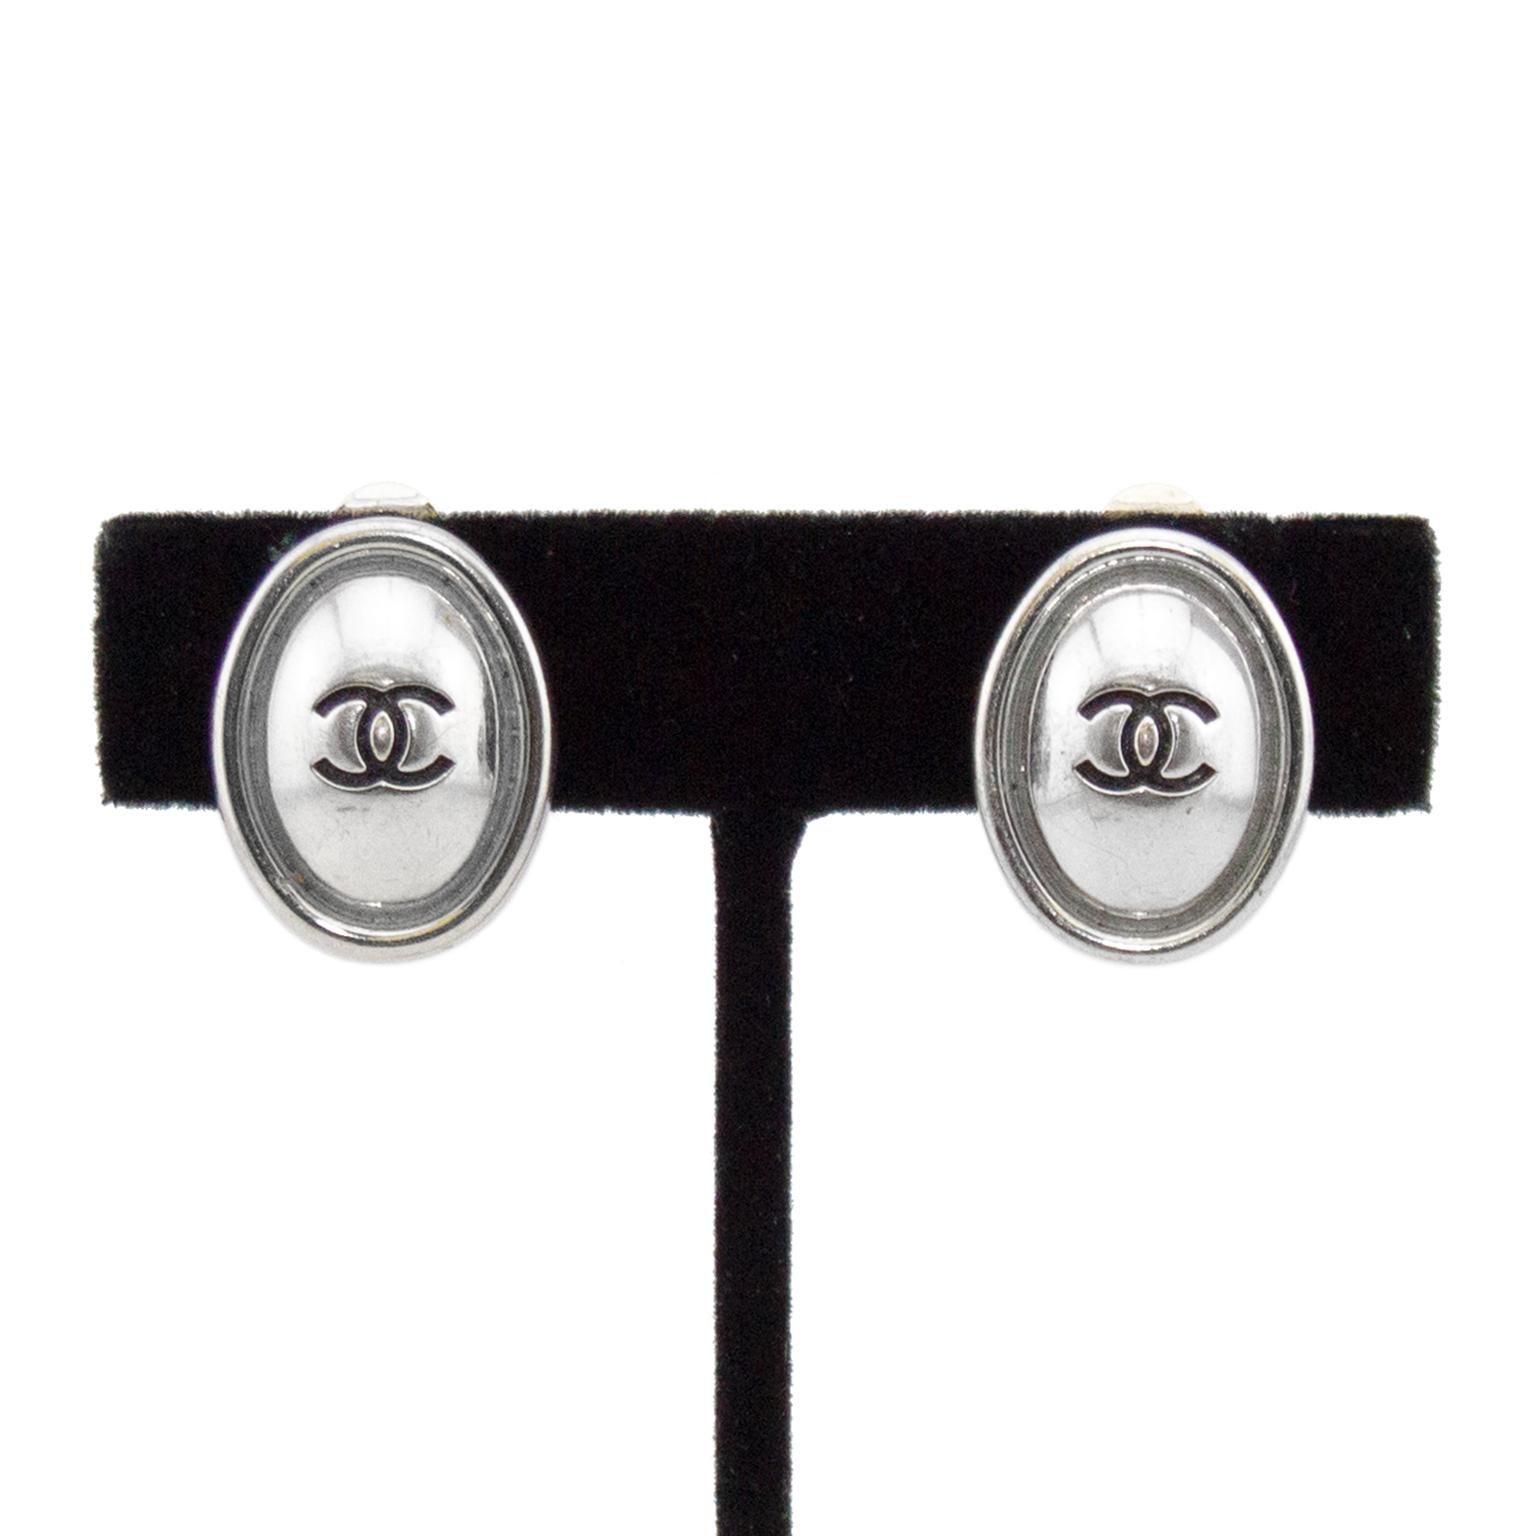 Chanel clip on earrings from the Spring 1999 collection. Silver tone metal oval with engraved interlocking logo in centre. Brand and date plaque on back. The silver is a great alternative to the mostly gold tone Chanel jewelry. Excellent vintage